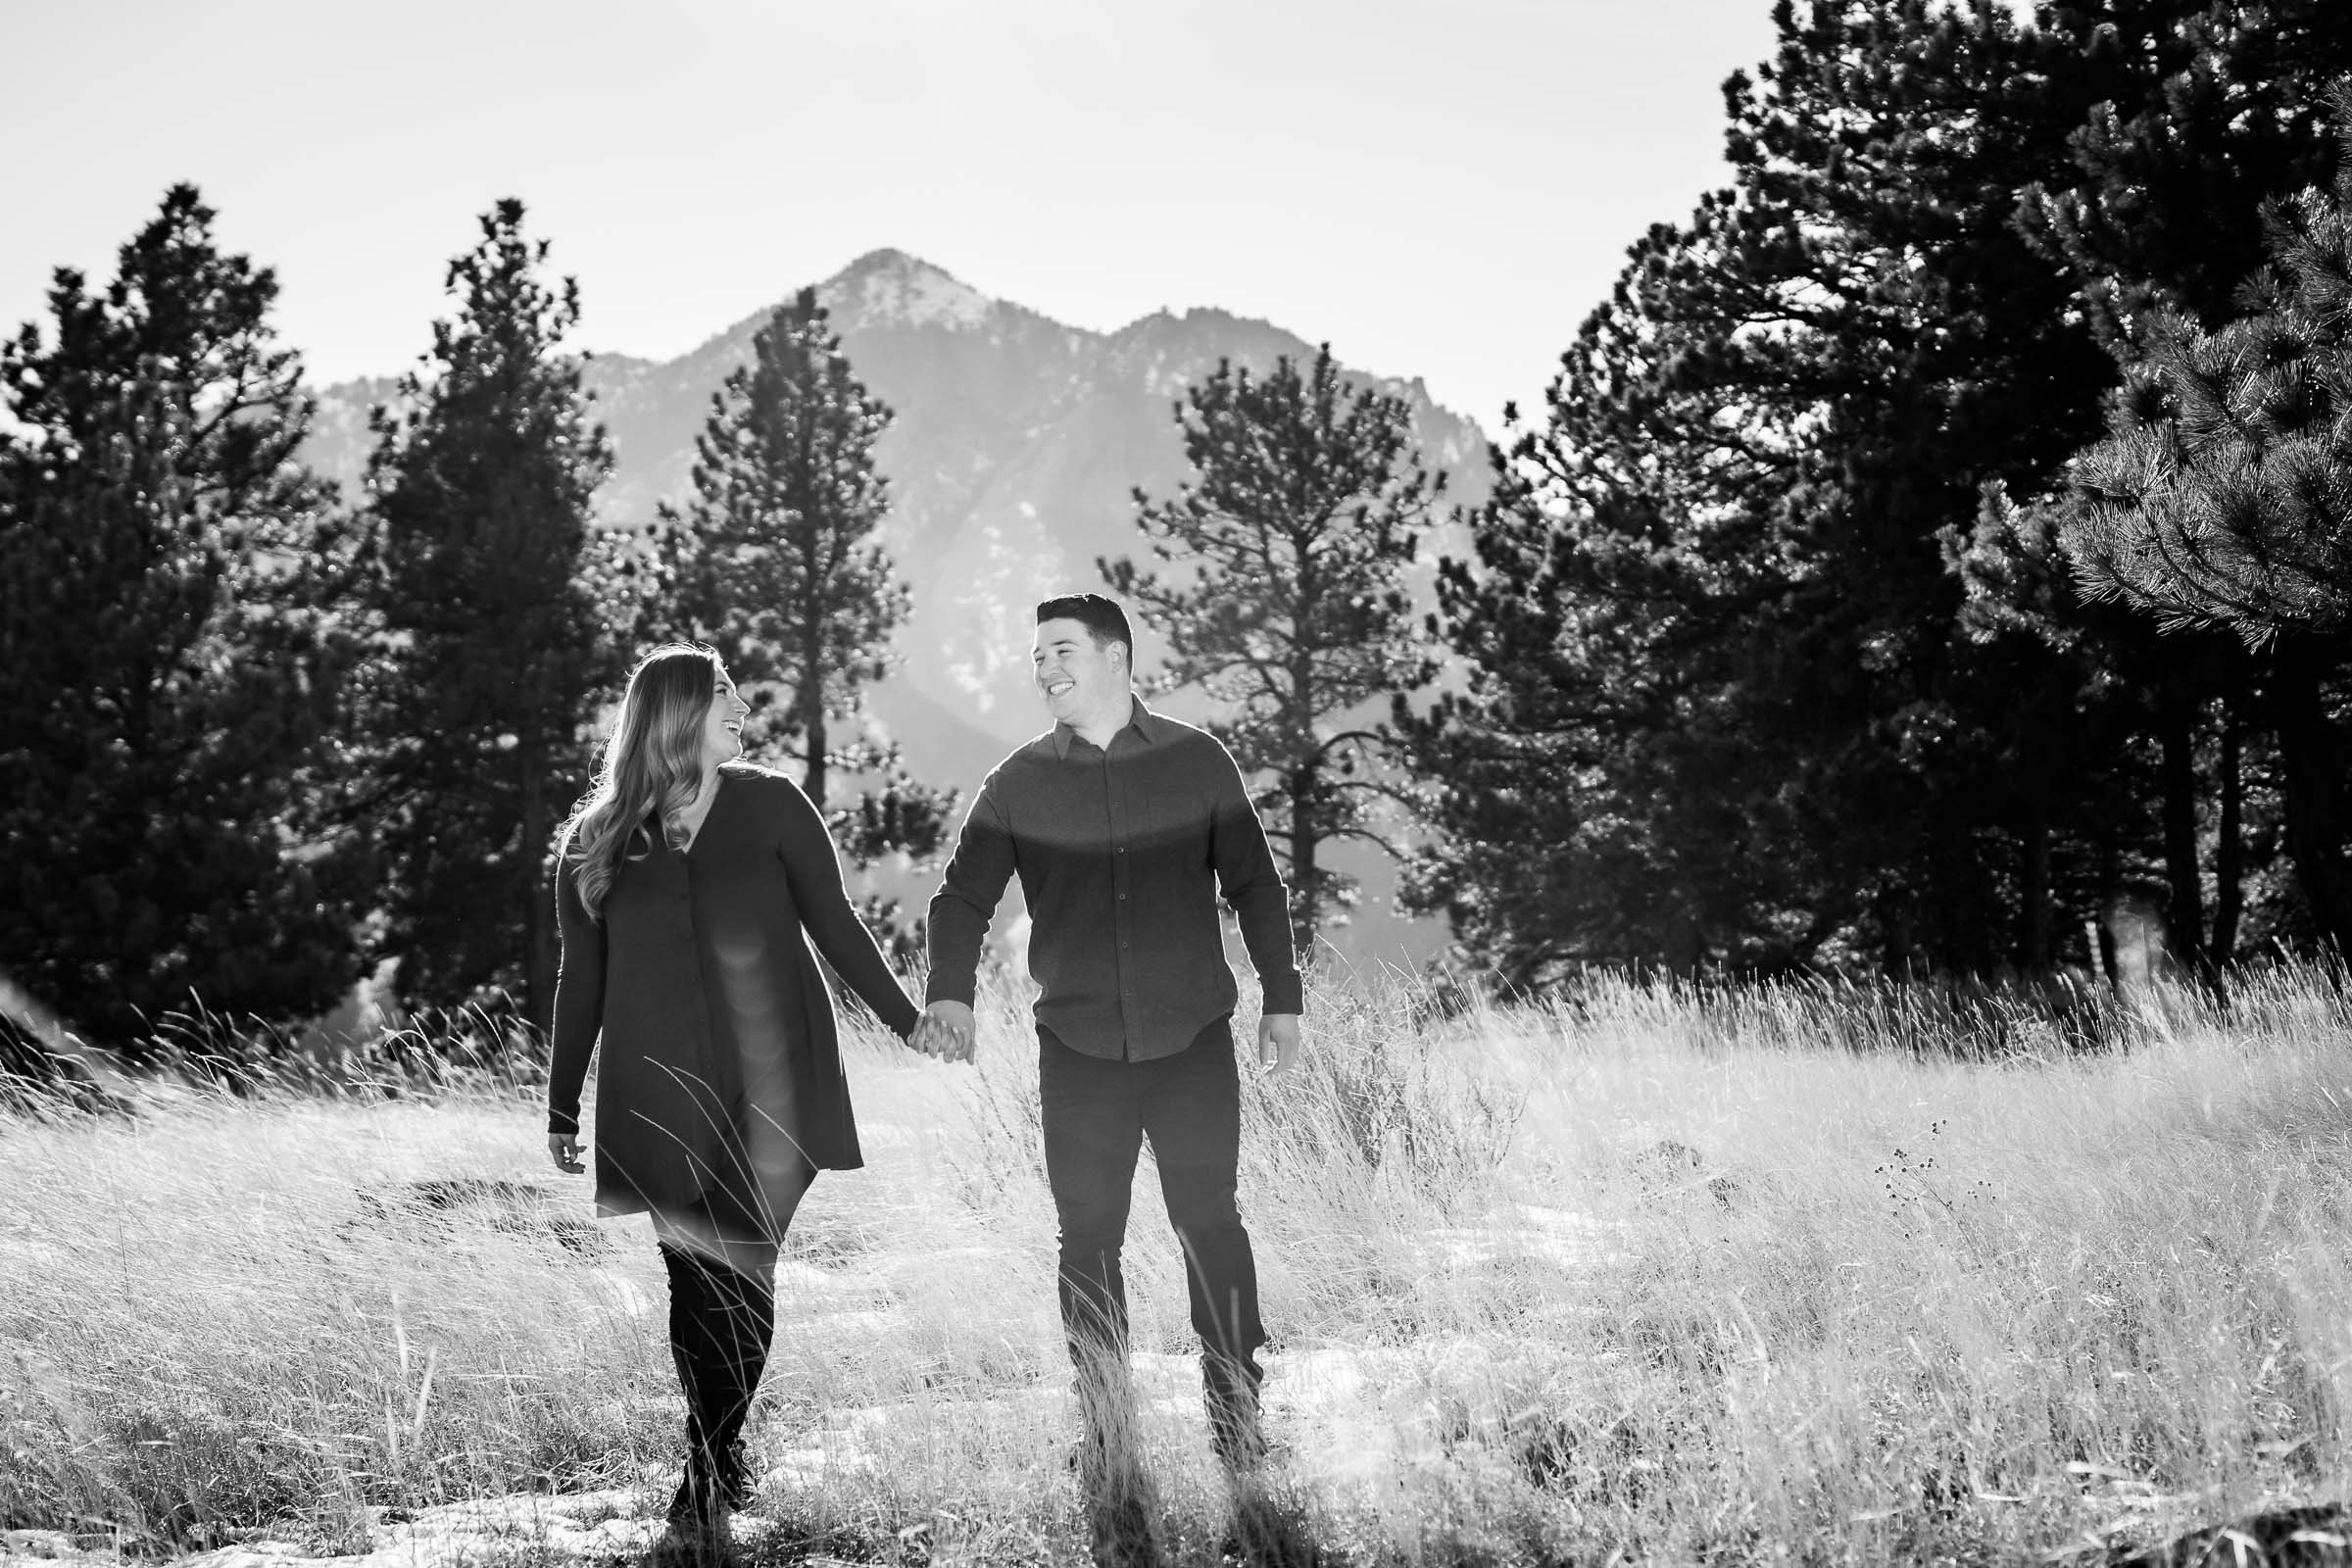 Engaged couple walks while holding hands with mountains in the background, Mountain Engagement Photos, Engagement Session, Engagement Photos, Engagement Photos Inspiration, Engagement Photography, Engagement Photographer, Engagement Portraits, Winter Engagement Photos, Snow Engagement Photos, Boulder engagement session, Boulder engagement photos, Boulder engagement photography, Boulder engagement photographer, Boulder engagement inspiration, NCAR Trail engagement session, NCAR Trail engagement photos, NCAR Trail engagement photography, NCAR Trail engagement photographer, NCAR Trail engagement inspiration, Colorado engagement session, Colorado engagement photos, Colorado engagement photography, Colorado engagement photographer, Colorado engagement inspiration